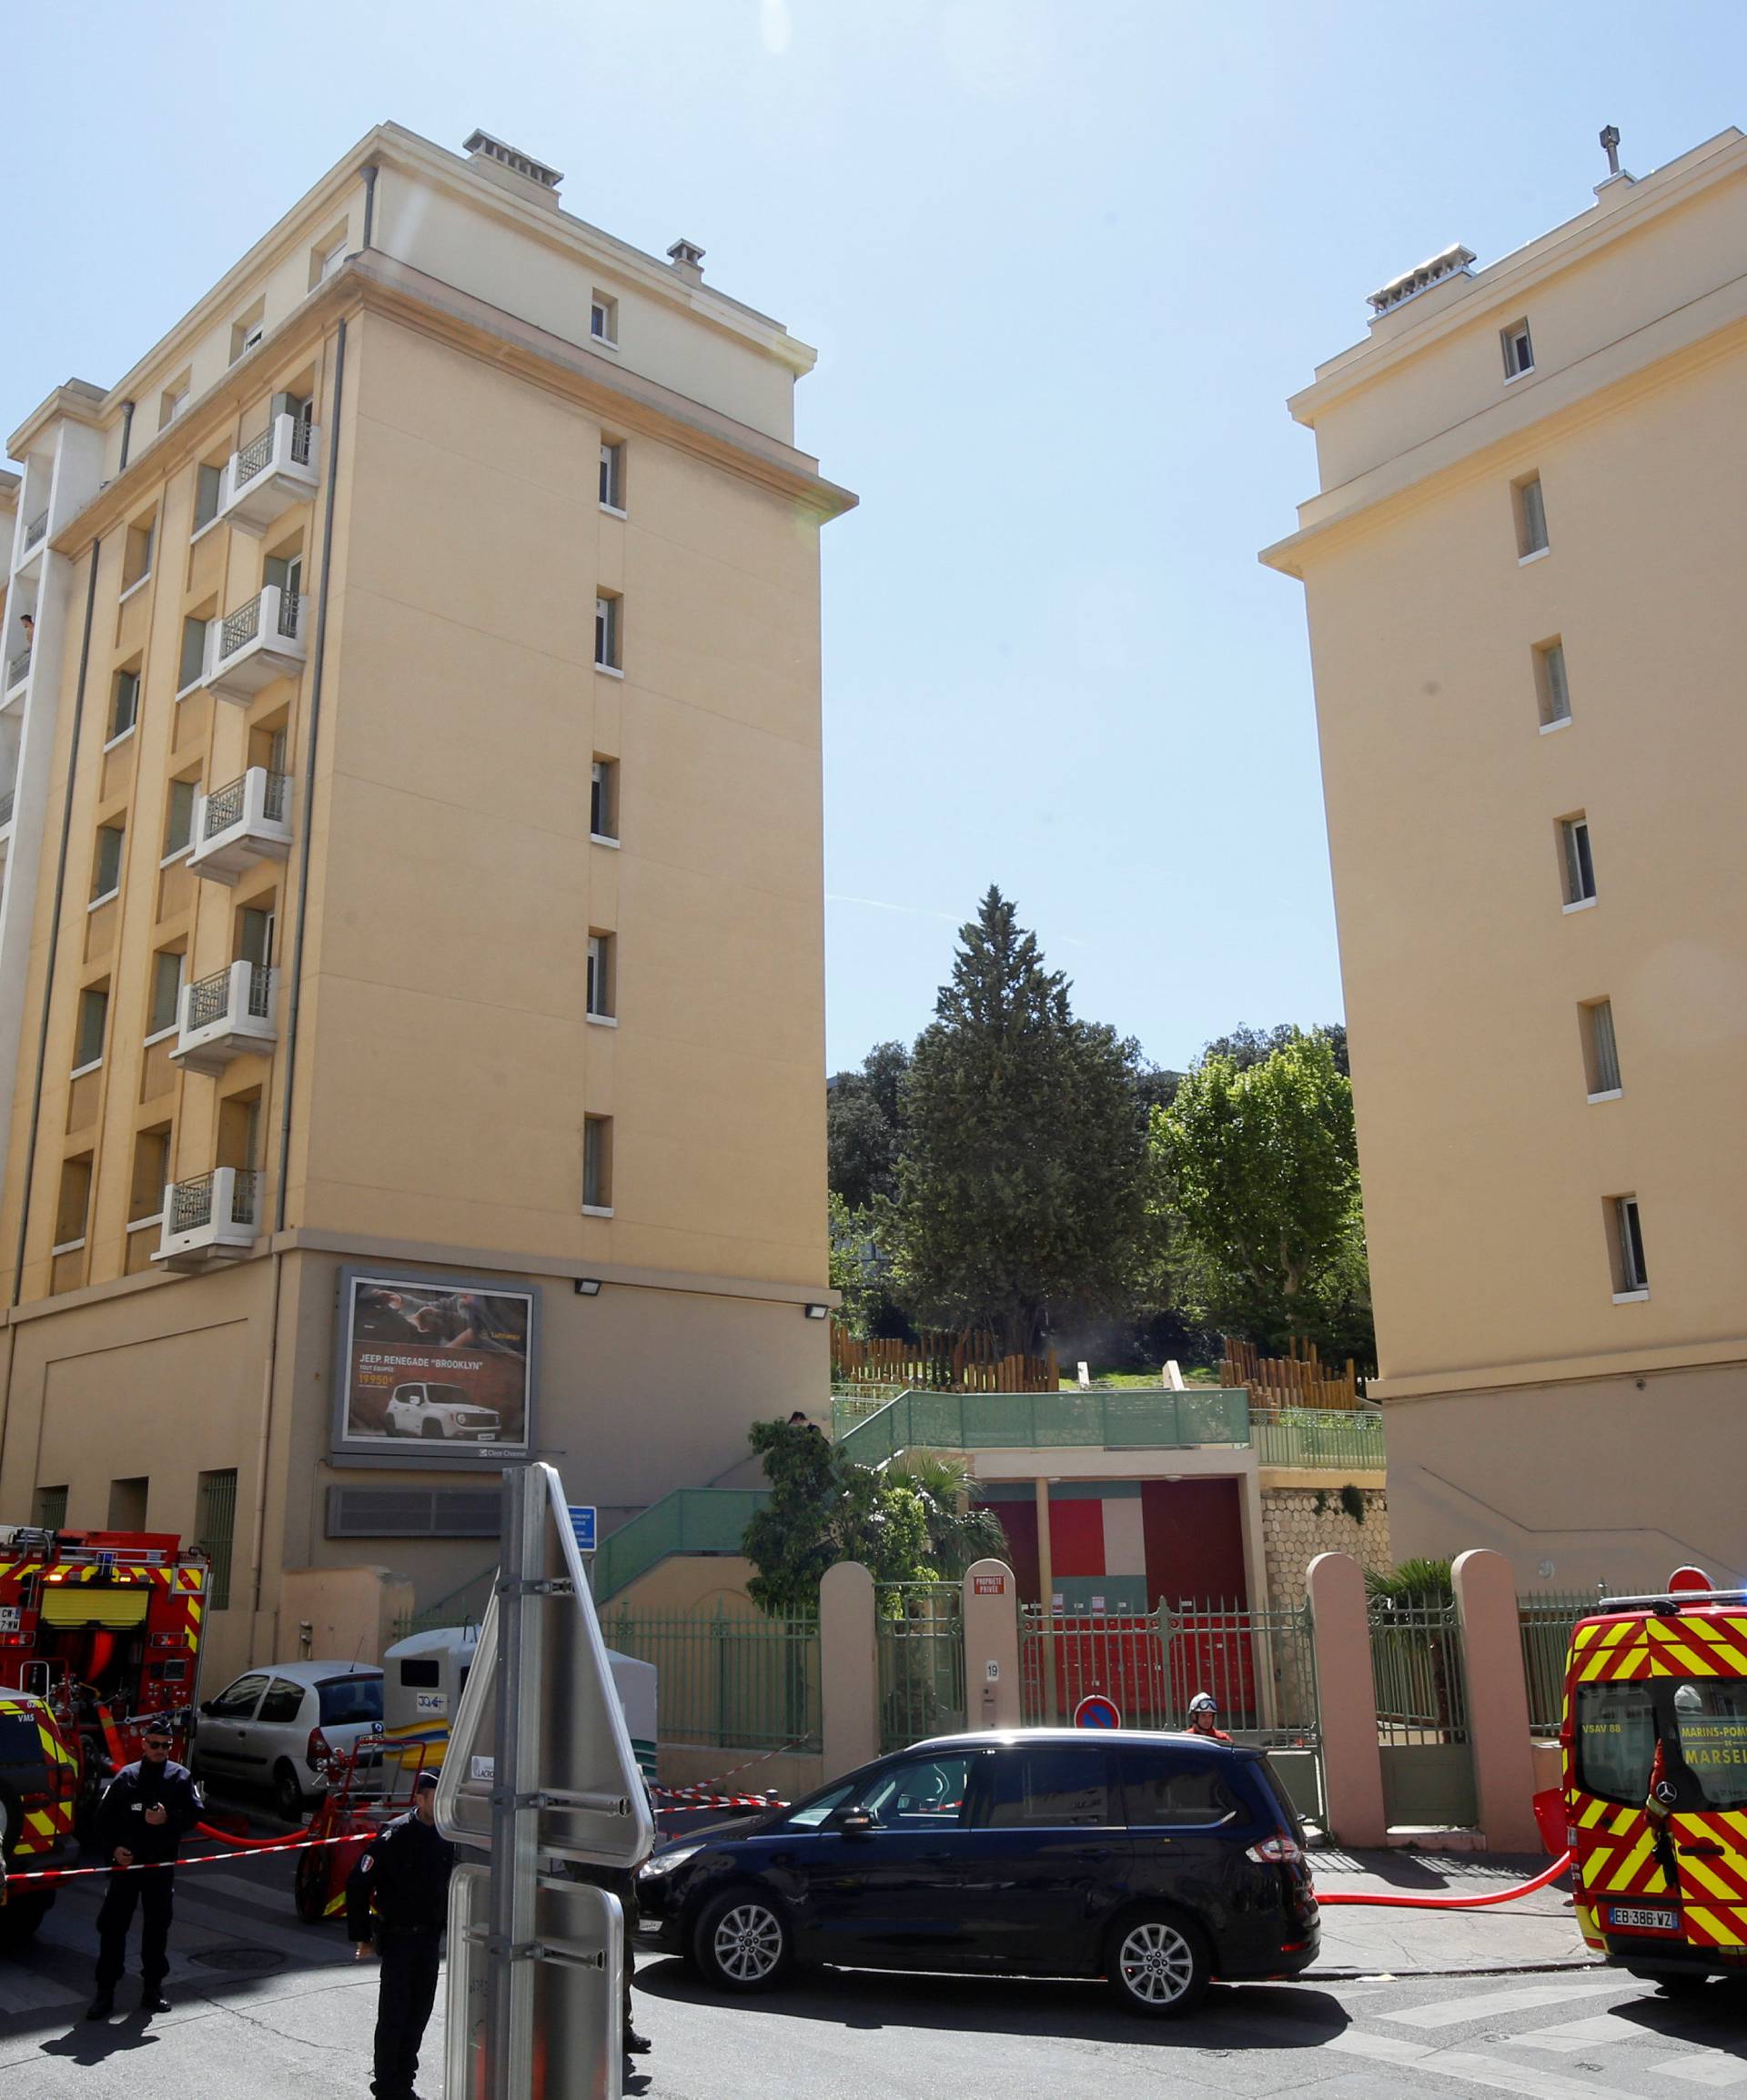 French firefighters secure the street as police conduct an investigation after two Frenchmen were arrested in Marseille